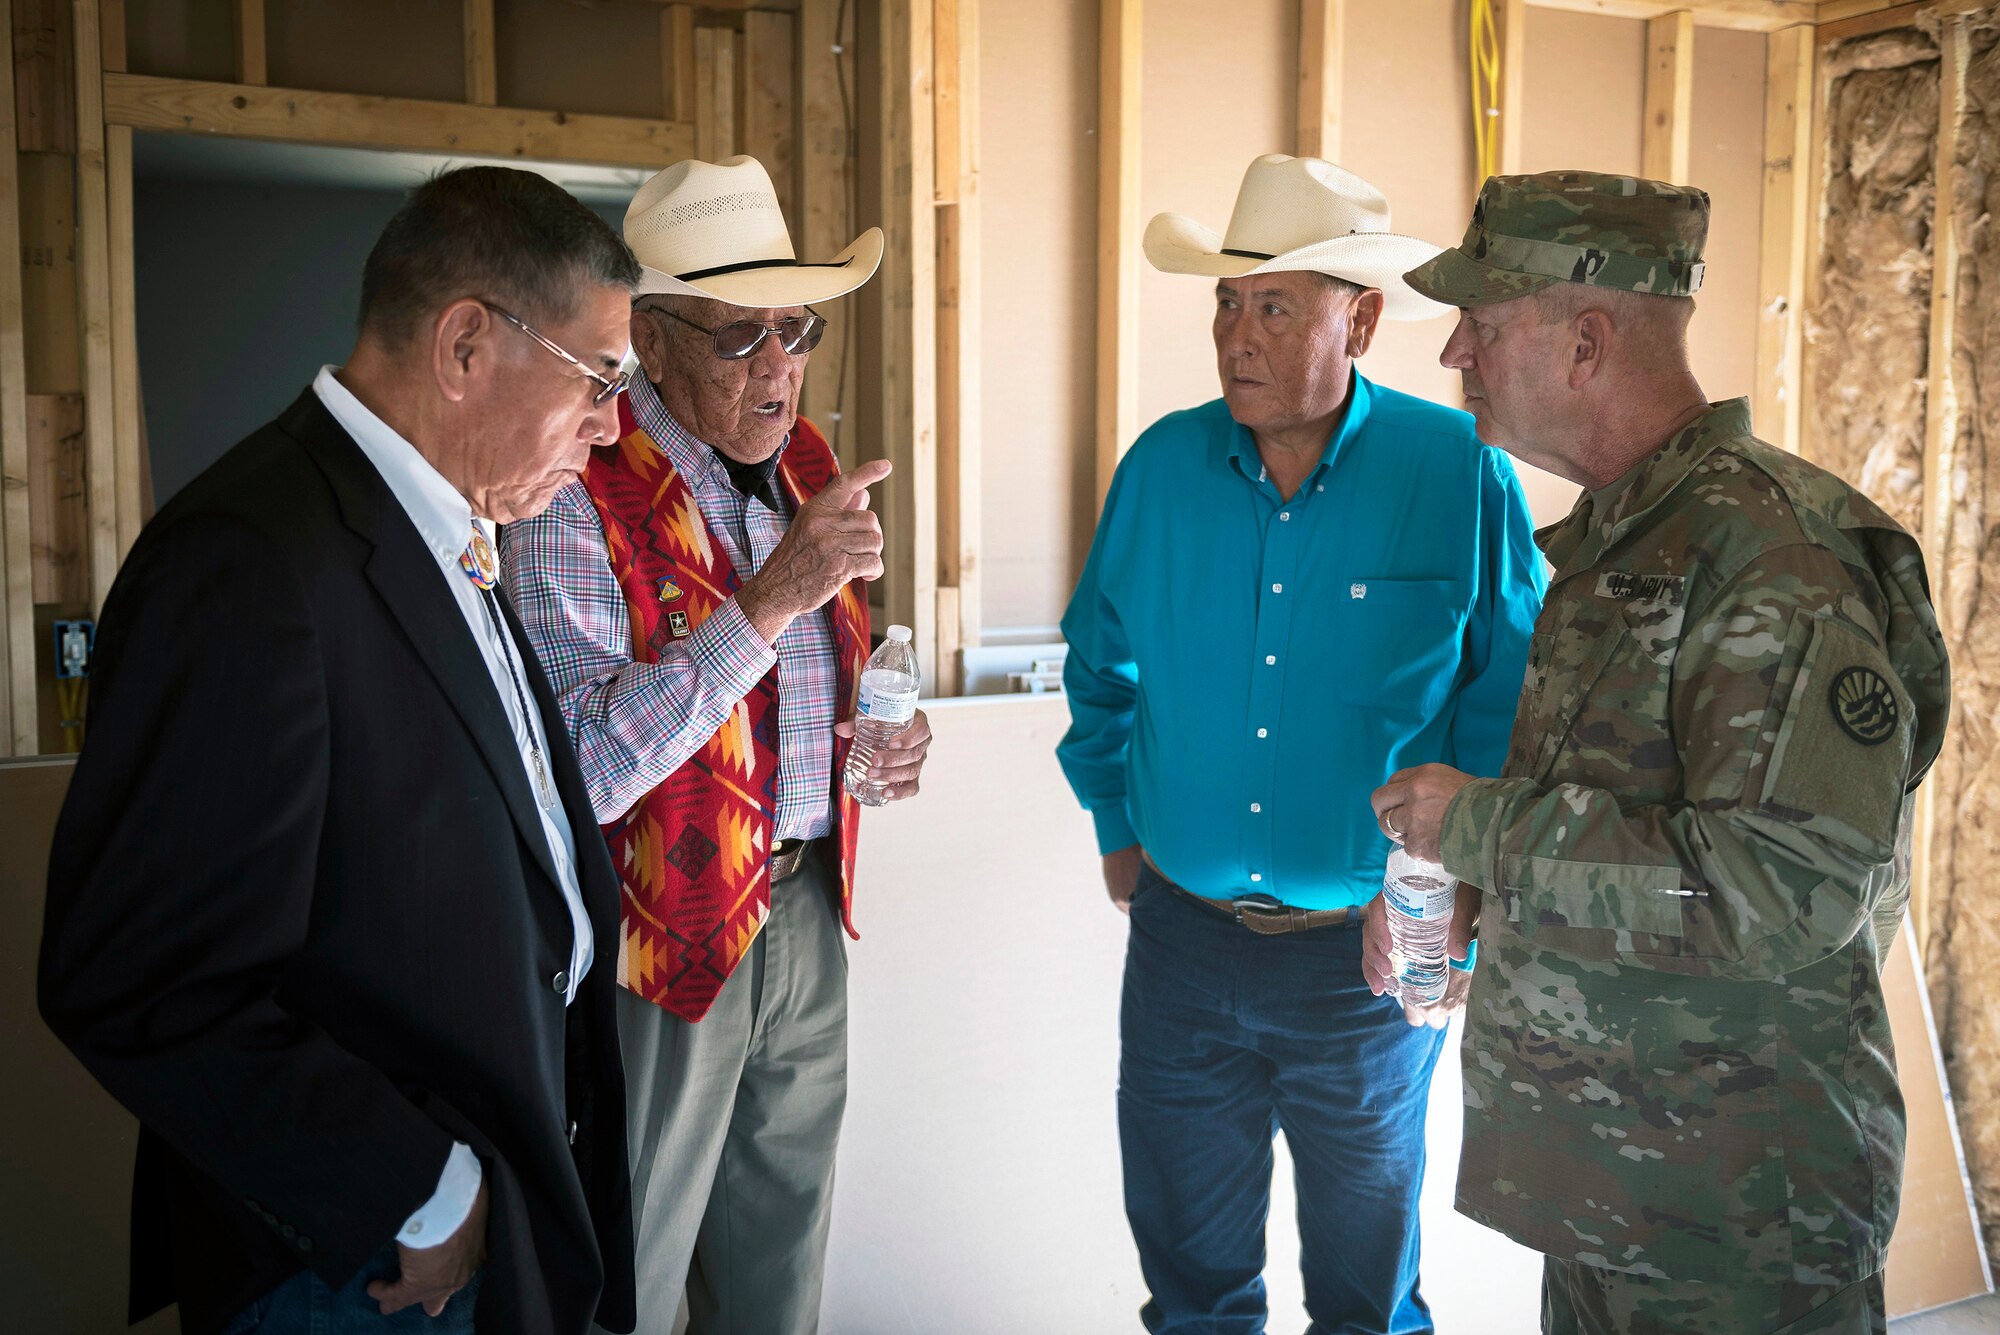 U.S. Army Brig. Gen. Robert Sparing, the assistant adjutant general-Army for the Montana National Guard, talks with Crow tribal leaders in veteran home in Crow Agency, Mont., July 26, 2017. The Innovative Readiness Training program is a civil-military relations cooperative that provided hands-on training for military members who built and renovated homes for Crow military veterans. (U.S. Air National Guard photo by Tech. Sgt. Lealan Buehrer)